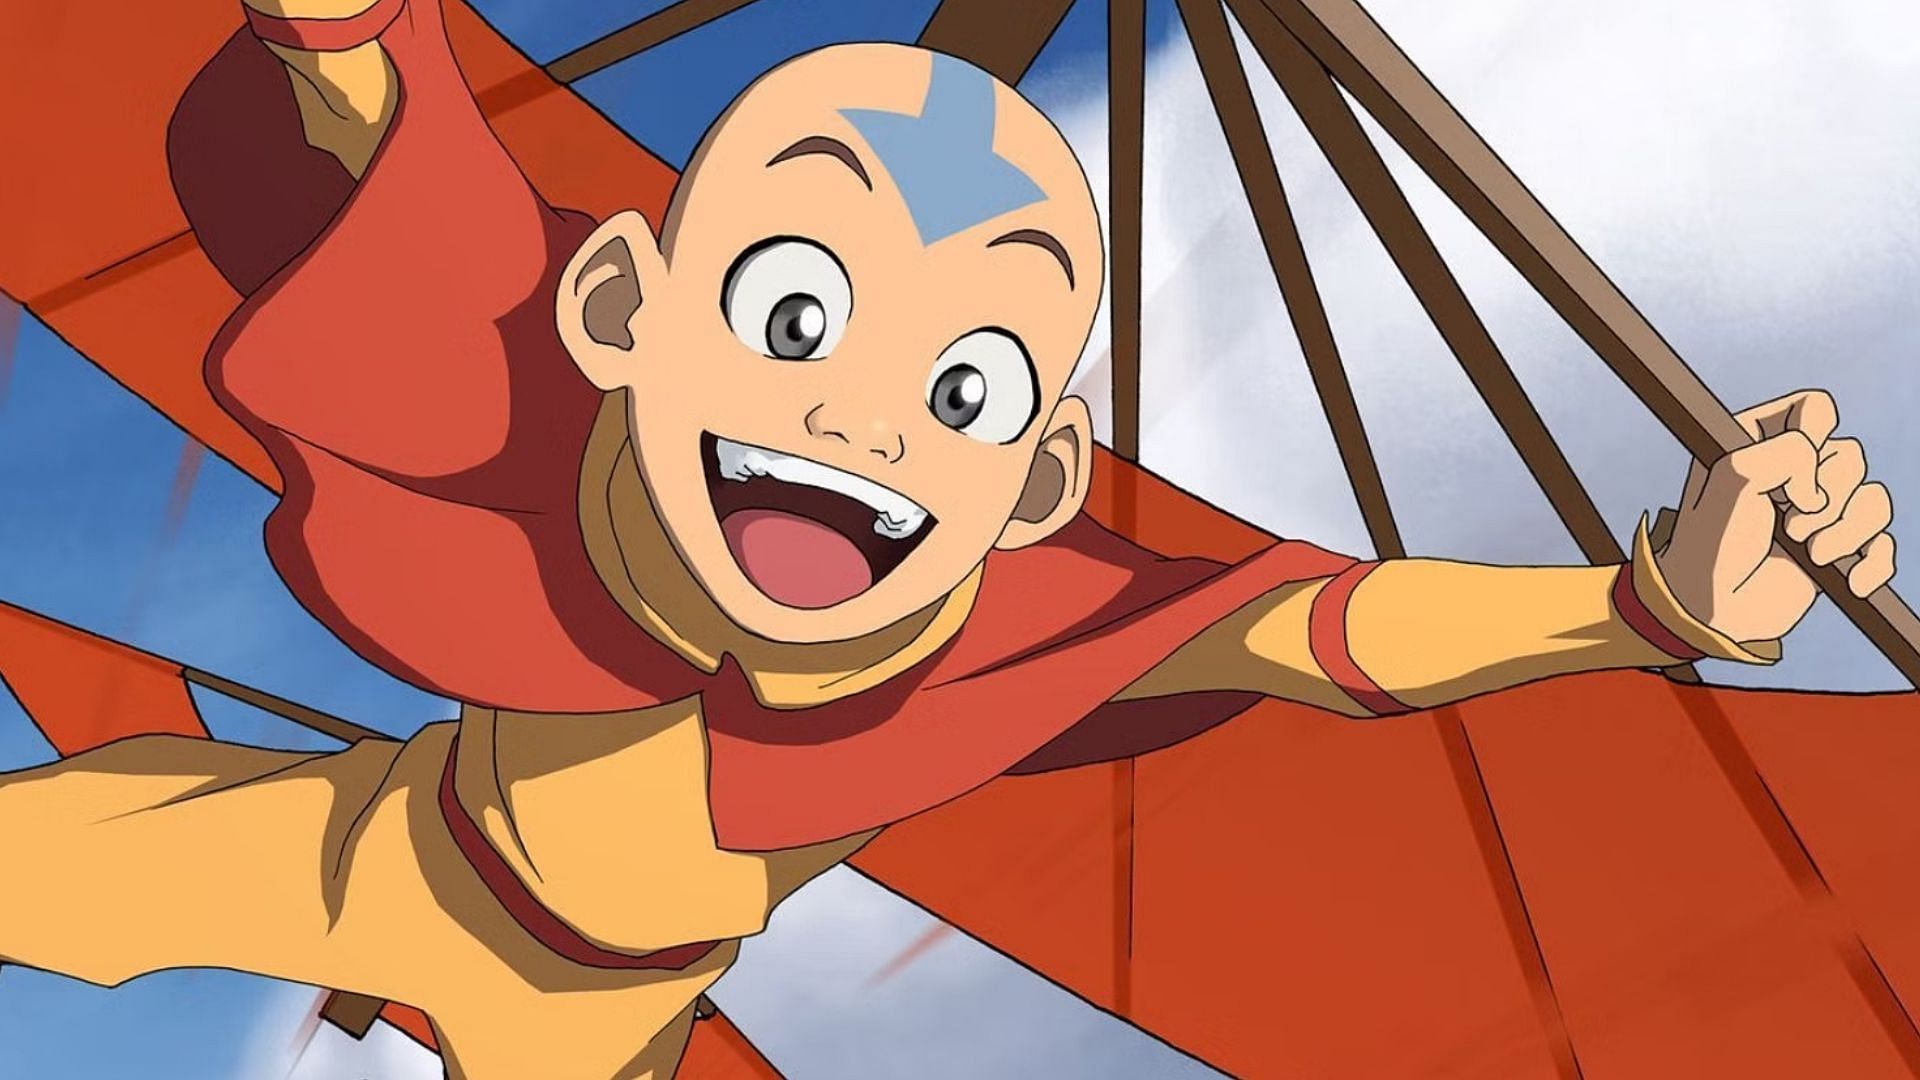 Aang as seen in the anime (Image via JM Animation)